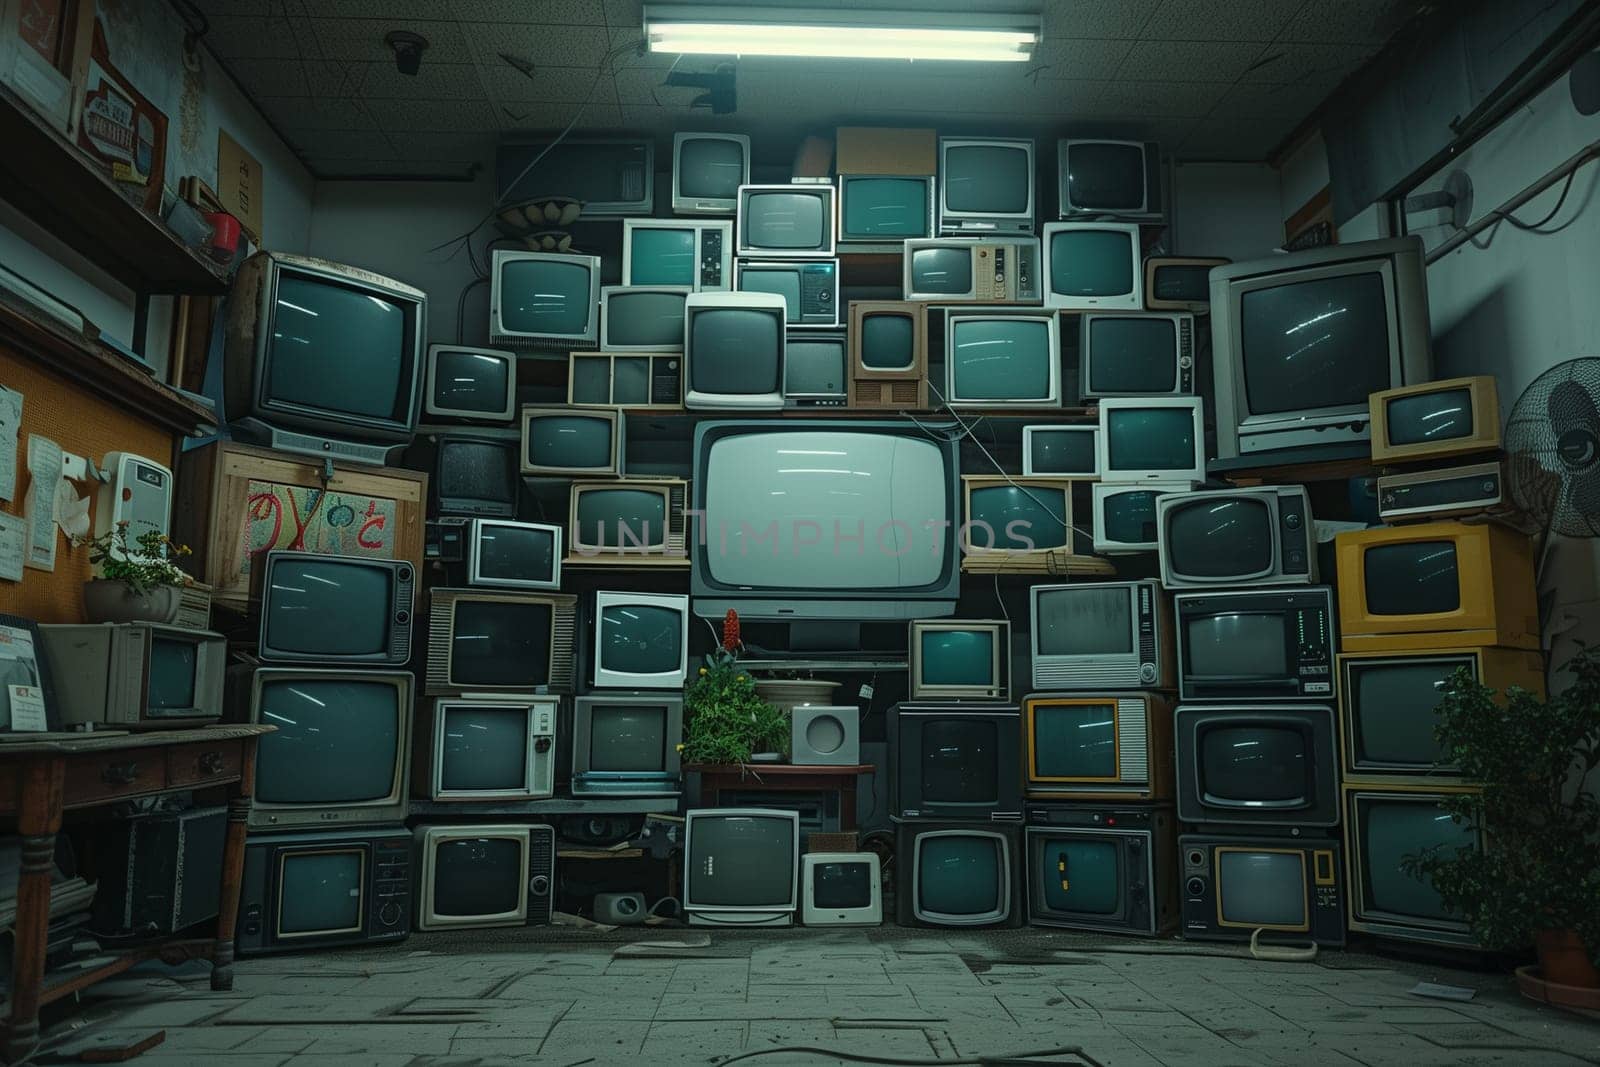 A room packed with multiple vintage television sets of various sizes and models, creating a nostalgic display of technology from different eras.